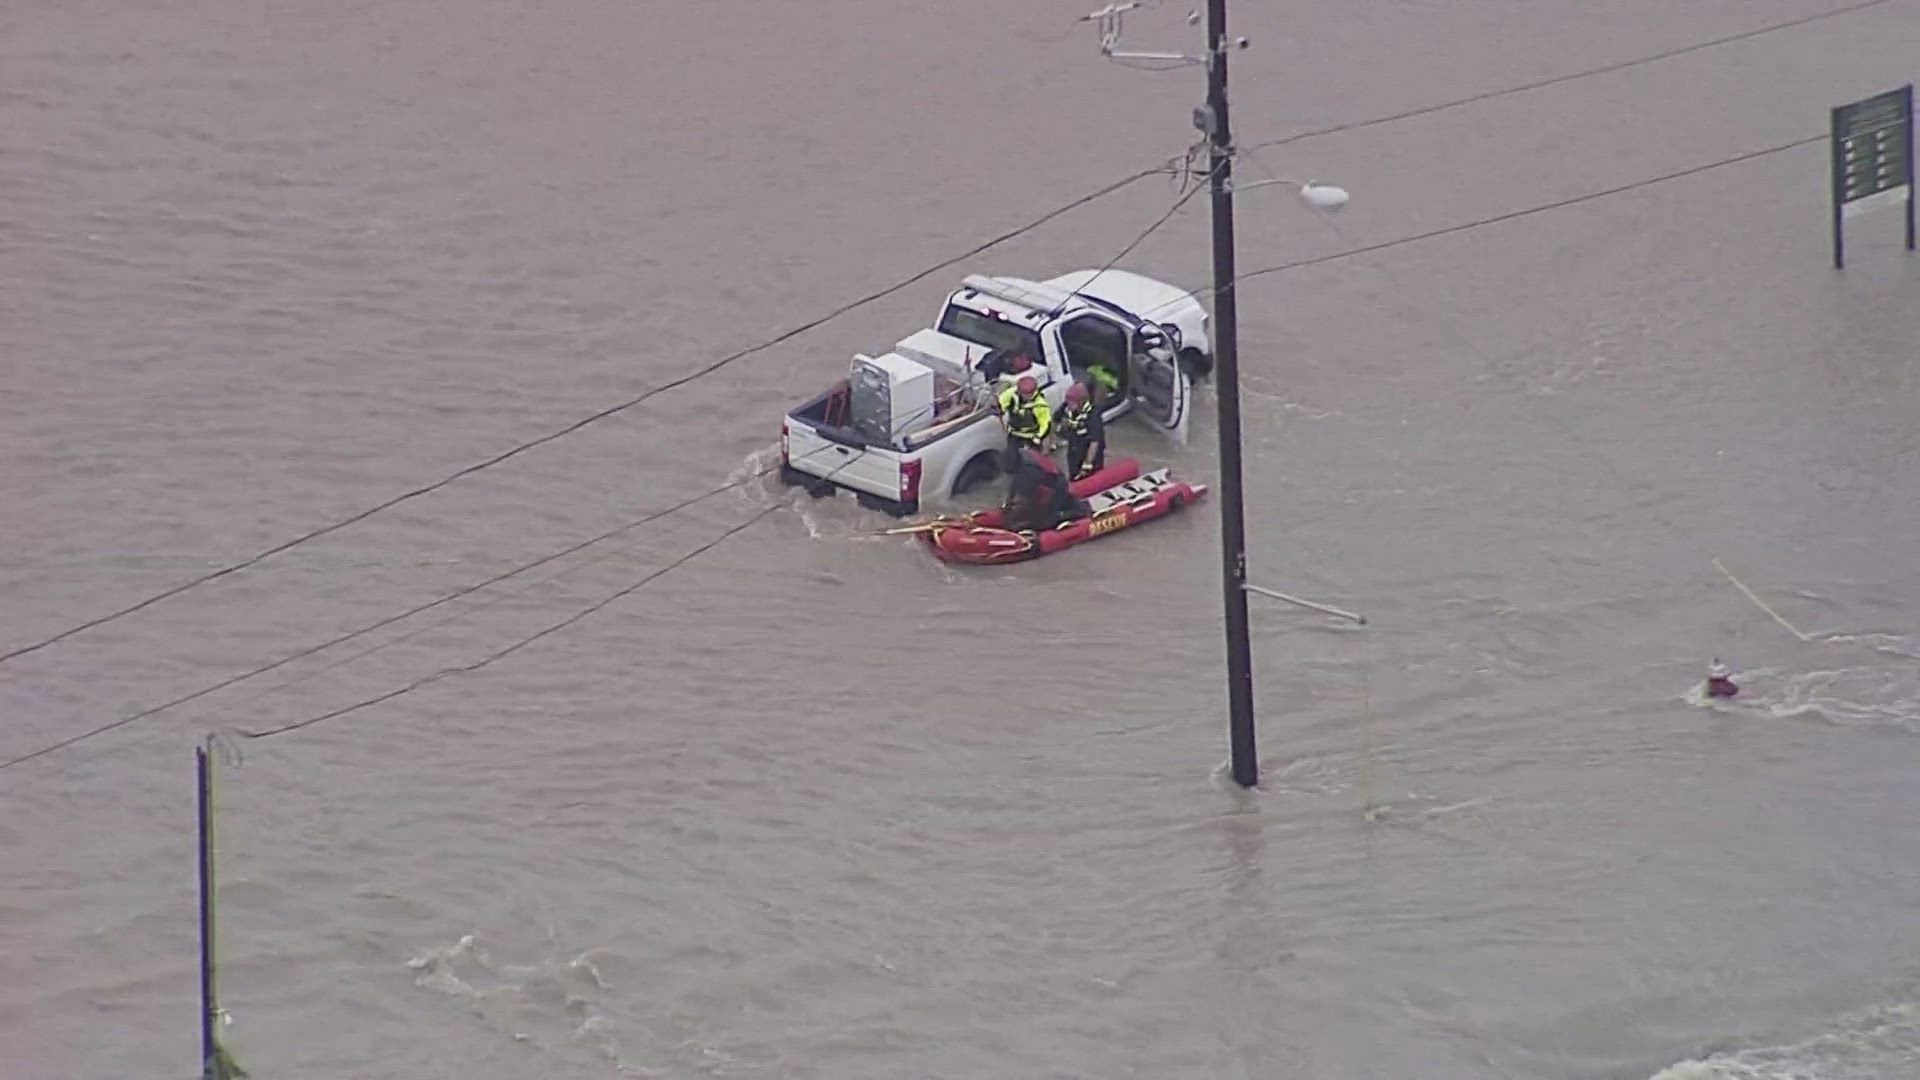 Dallas Fire-Rescue responded to 15 high-water incidents on Thursday. All involved were disabled after being driven into high water.